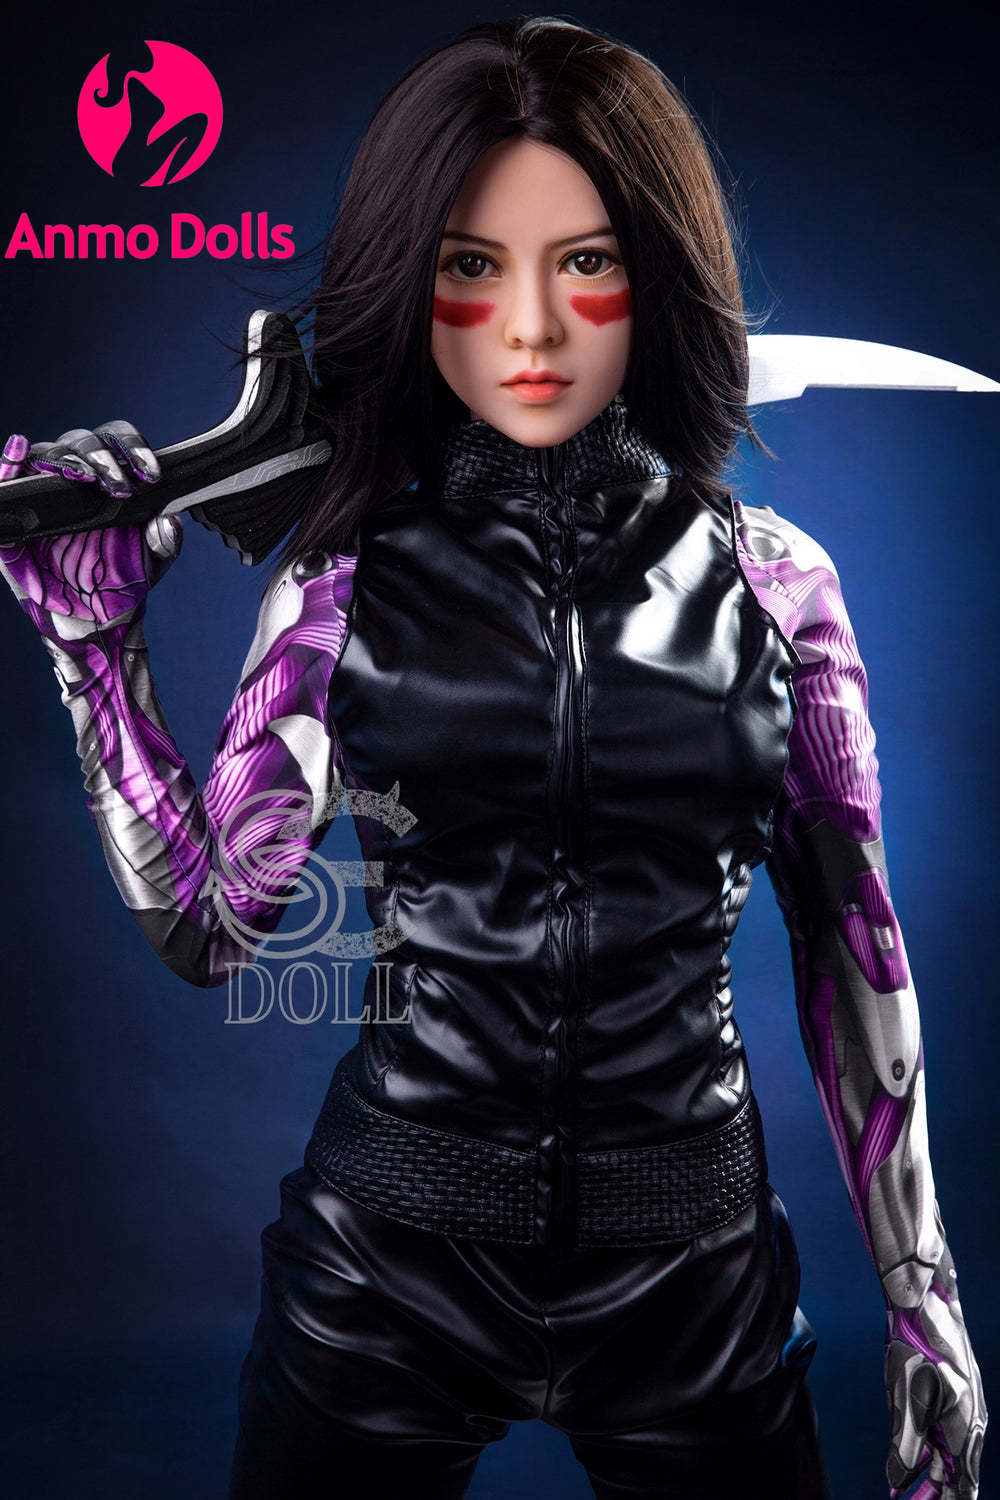 Margie - The Stylish Vigilante TPE Sex Doll with a Deadly Touch